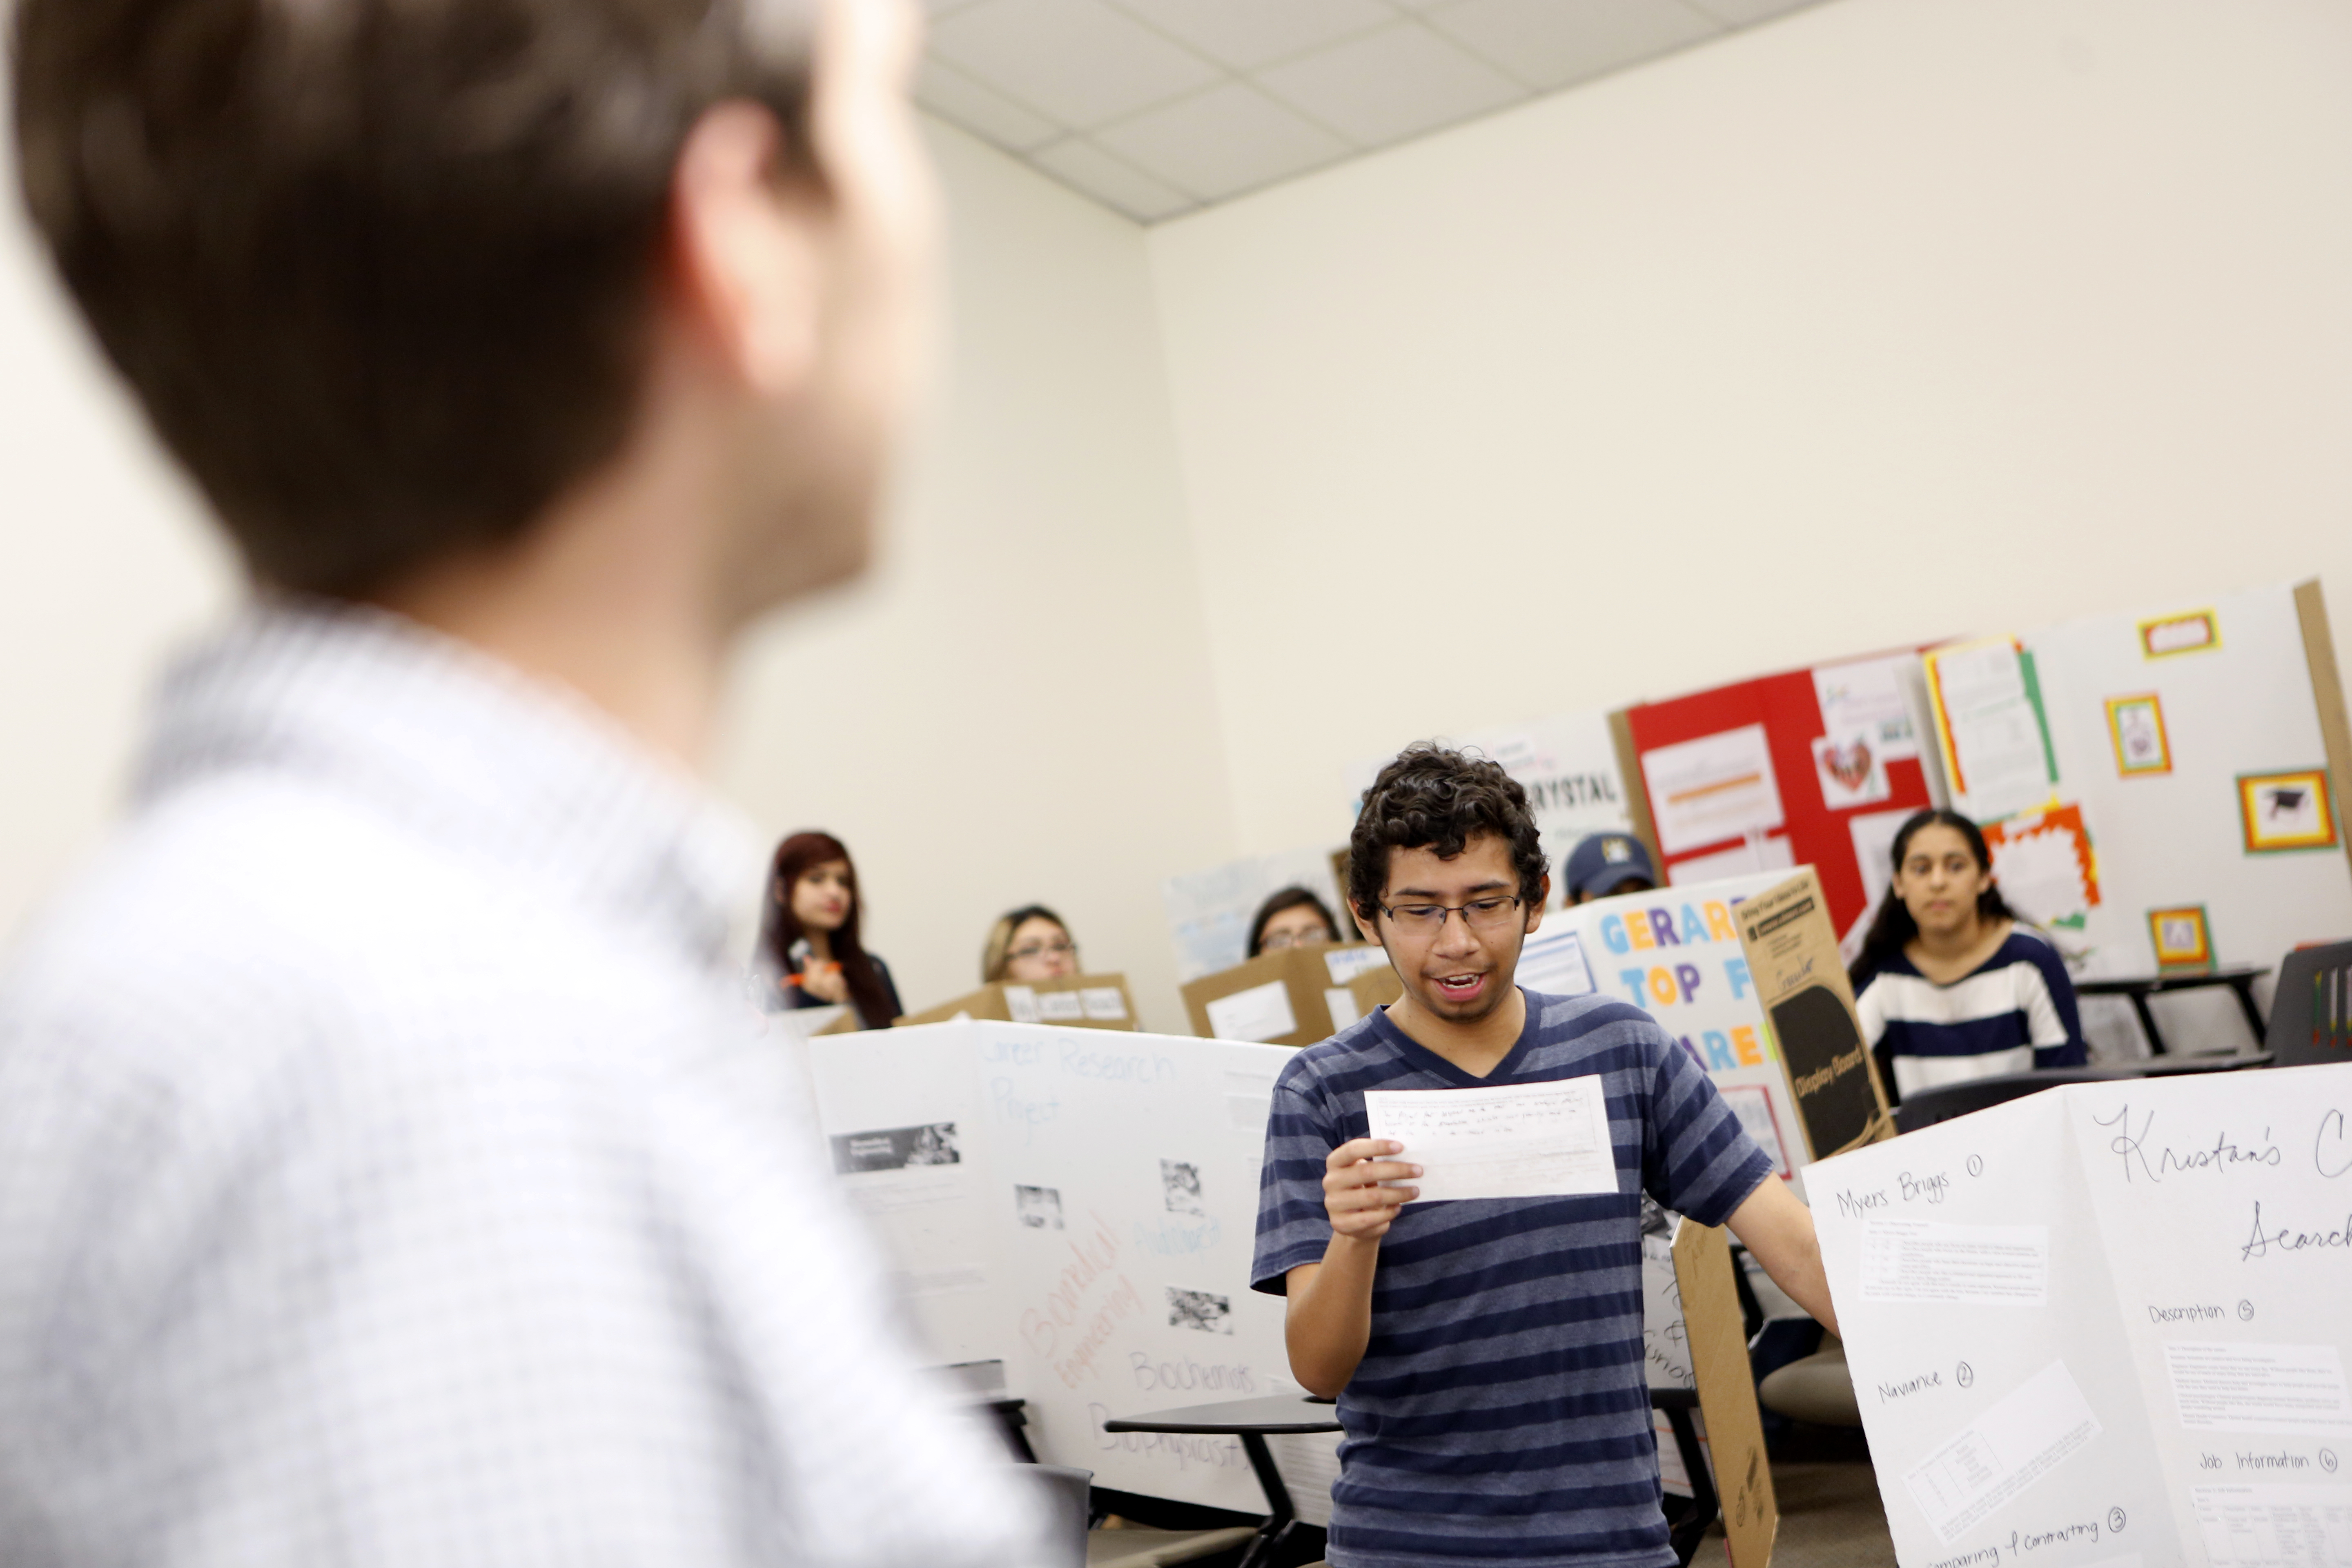 Joel Luera discusses his favorite career research project during a Pathways to College class led by DISD teacher Jonathan Martin (left) at Eastfield College Campus where he takes classes as part of W.W. Samuell Early College High School in Dallas. Photographed Monday, April 18, 2016. (photo © Lara Solt)